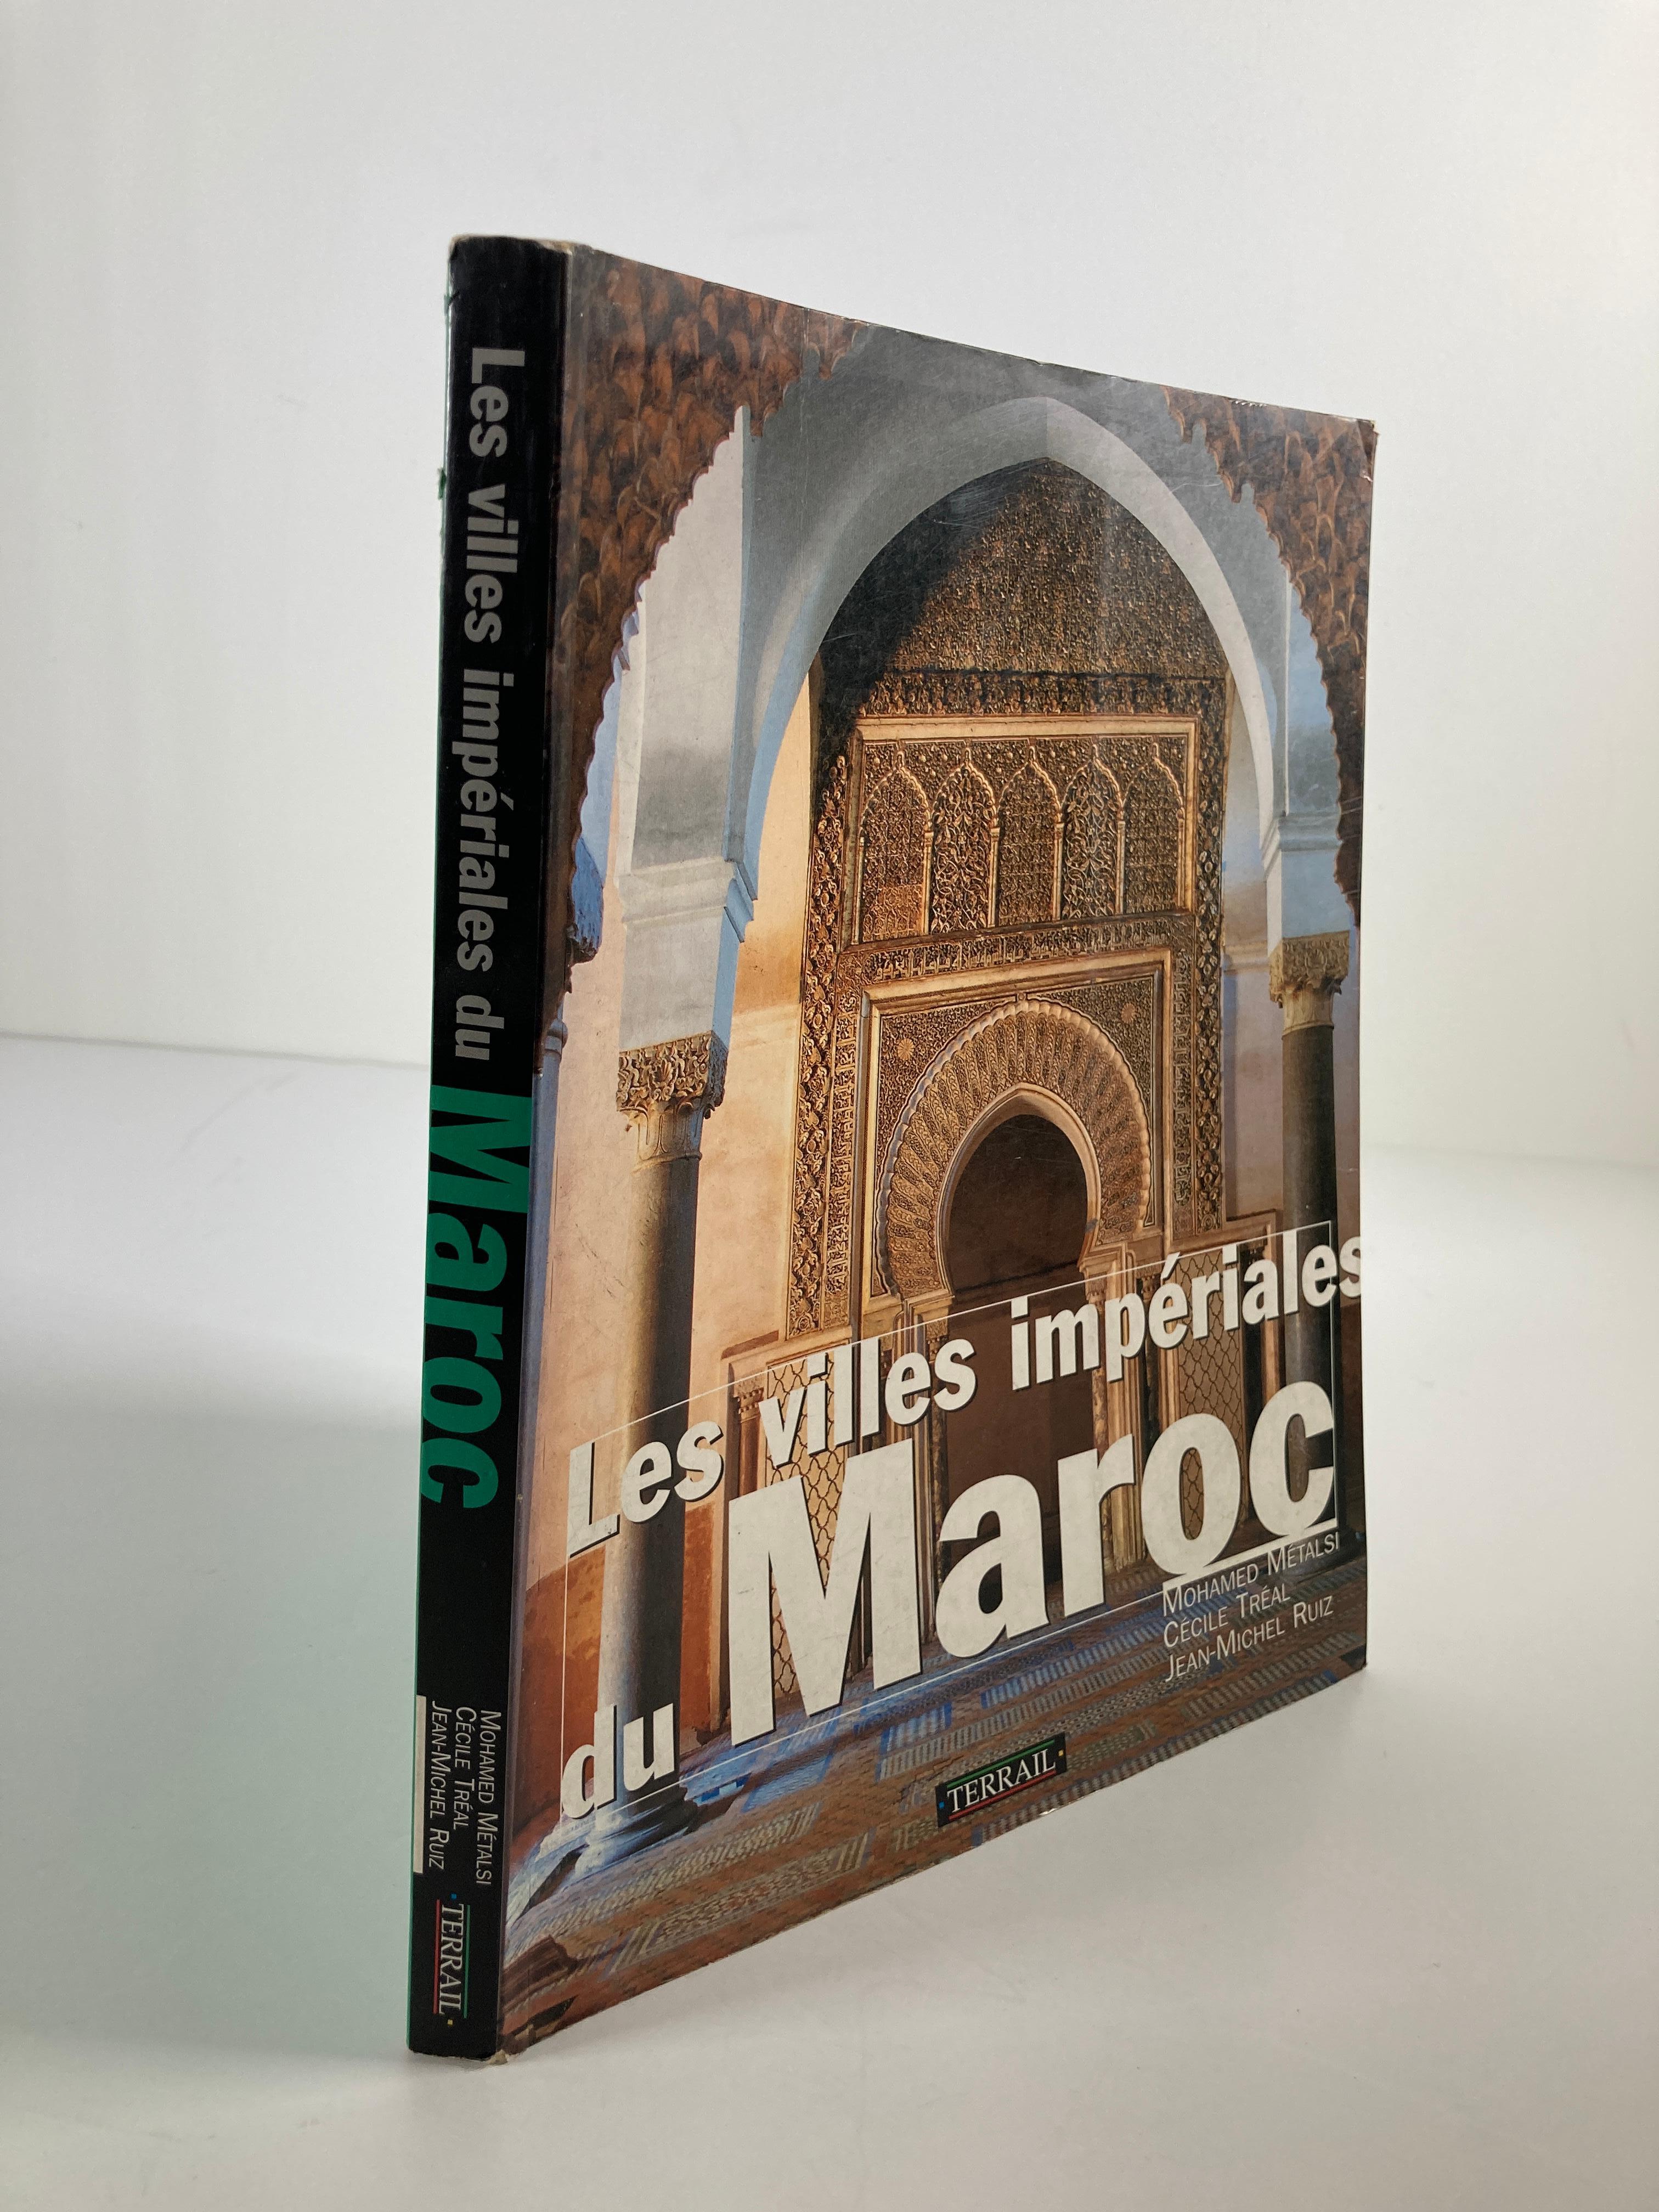 Moorish The Imperial Cities of Morocco, Les Villes Imperiales du Maroc French Table Book